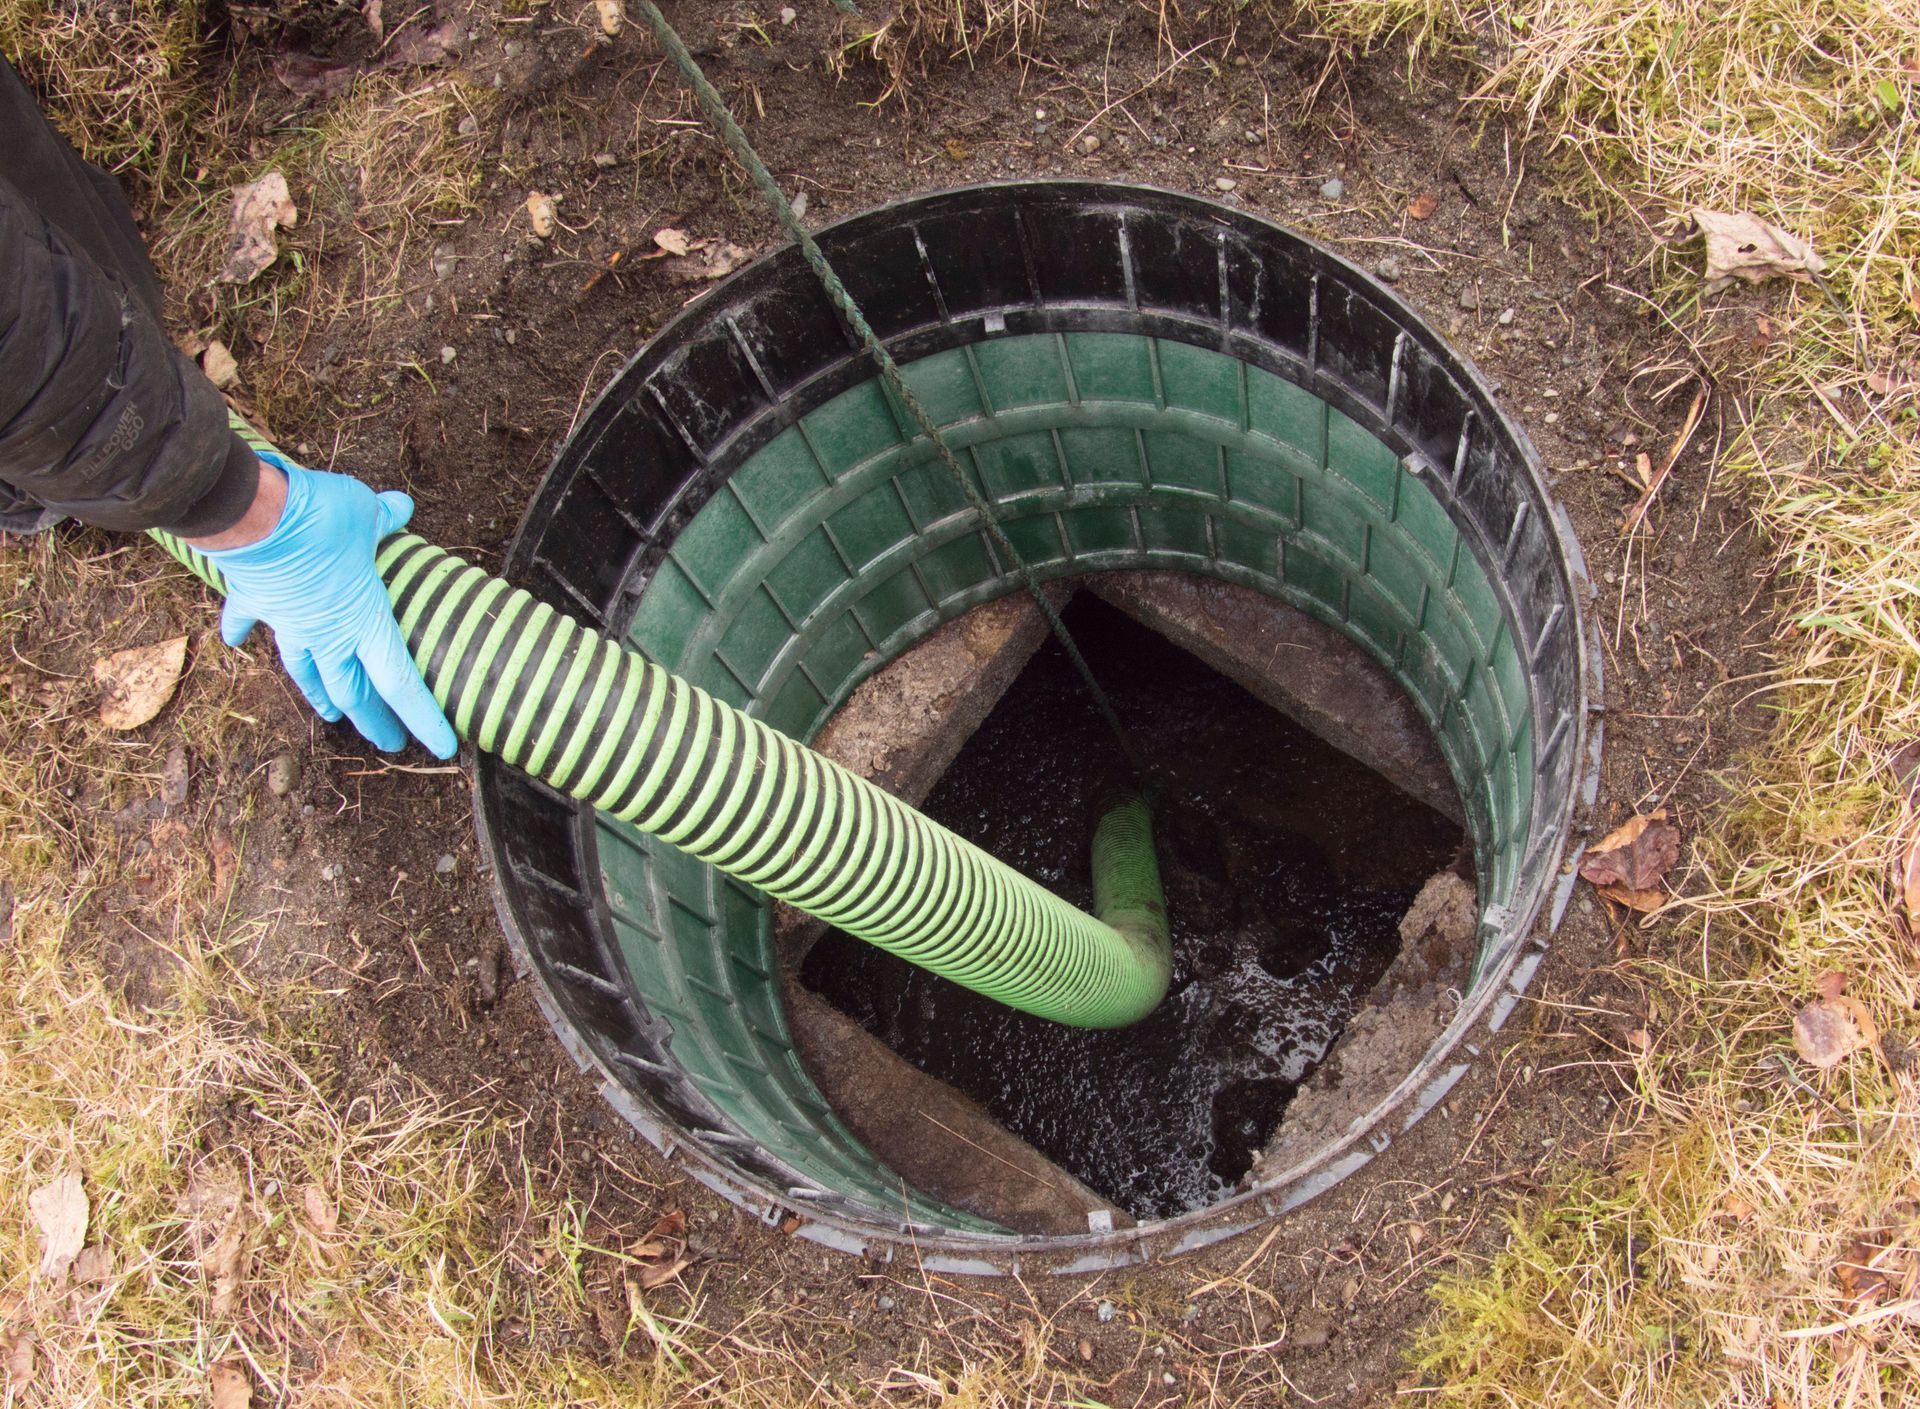 Septic tank being emptied with a hose pump at a residential property.